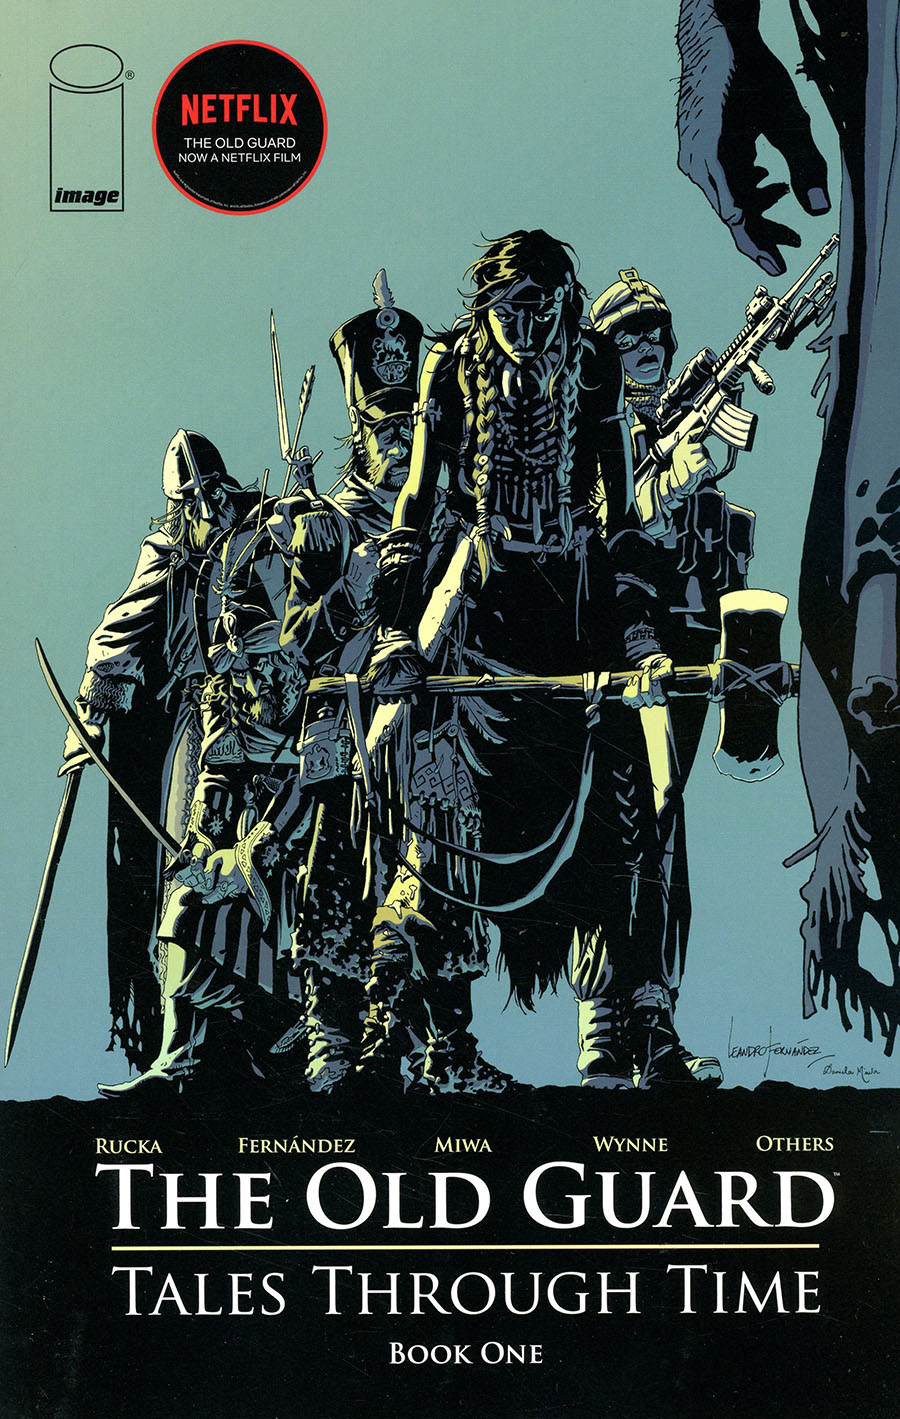 Old Guard Tales Through Time Vol 1 TP